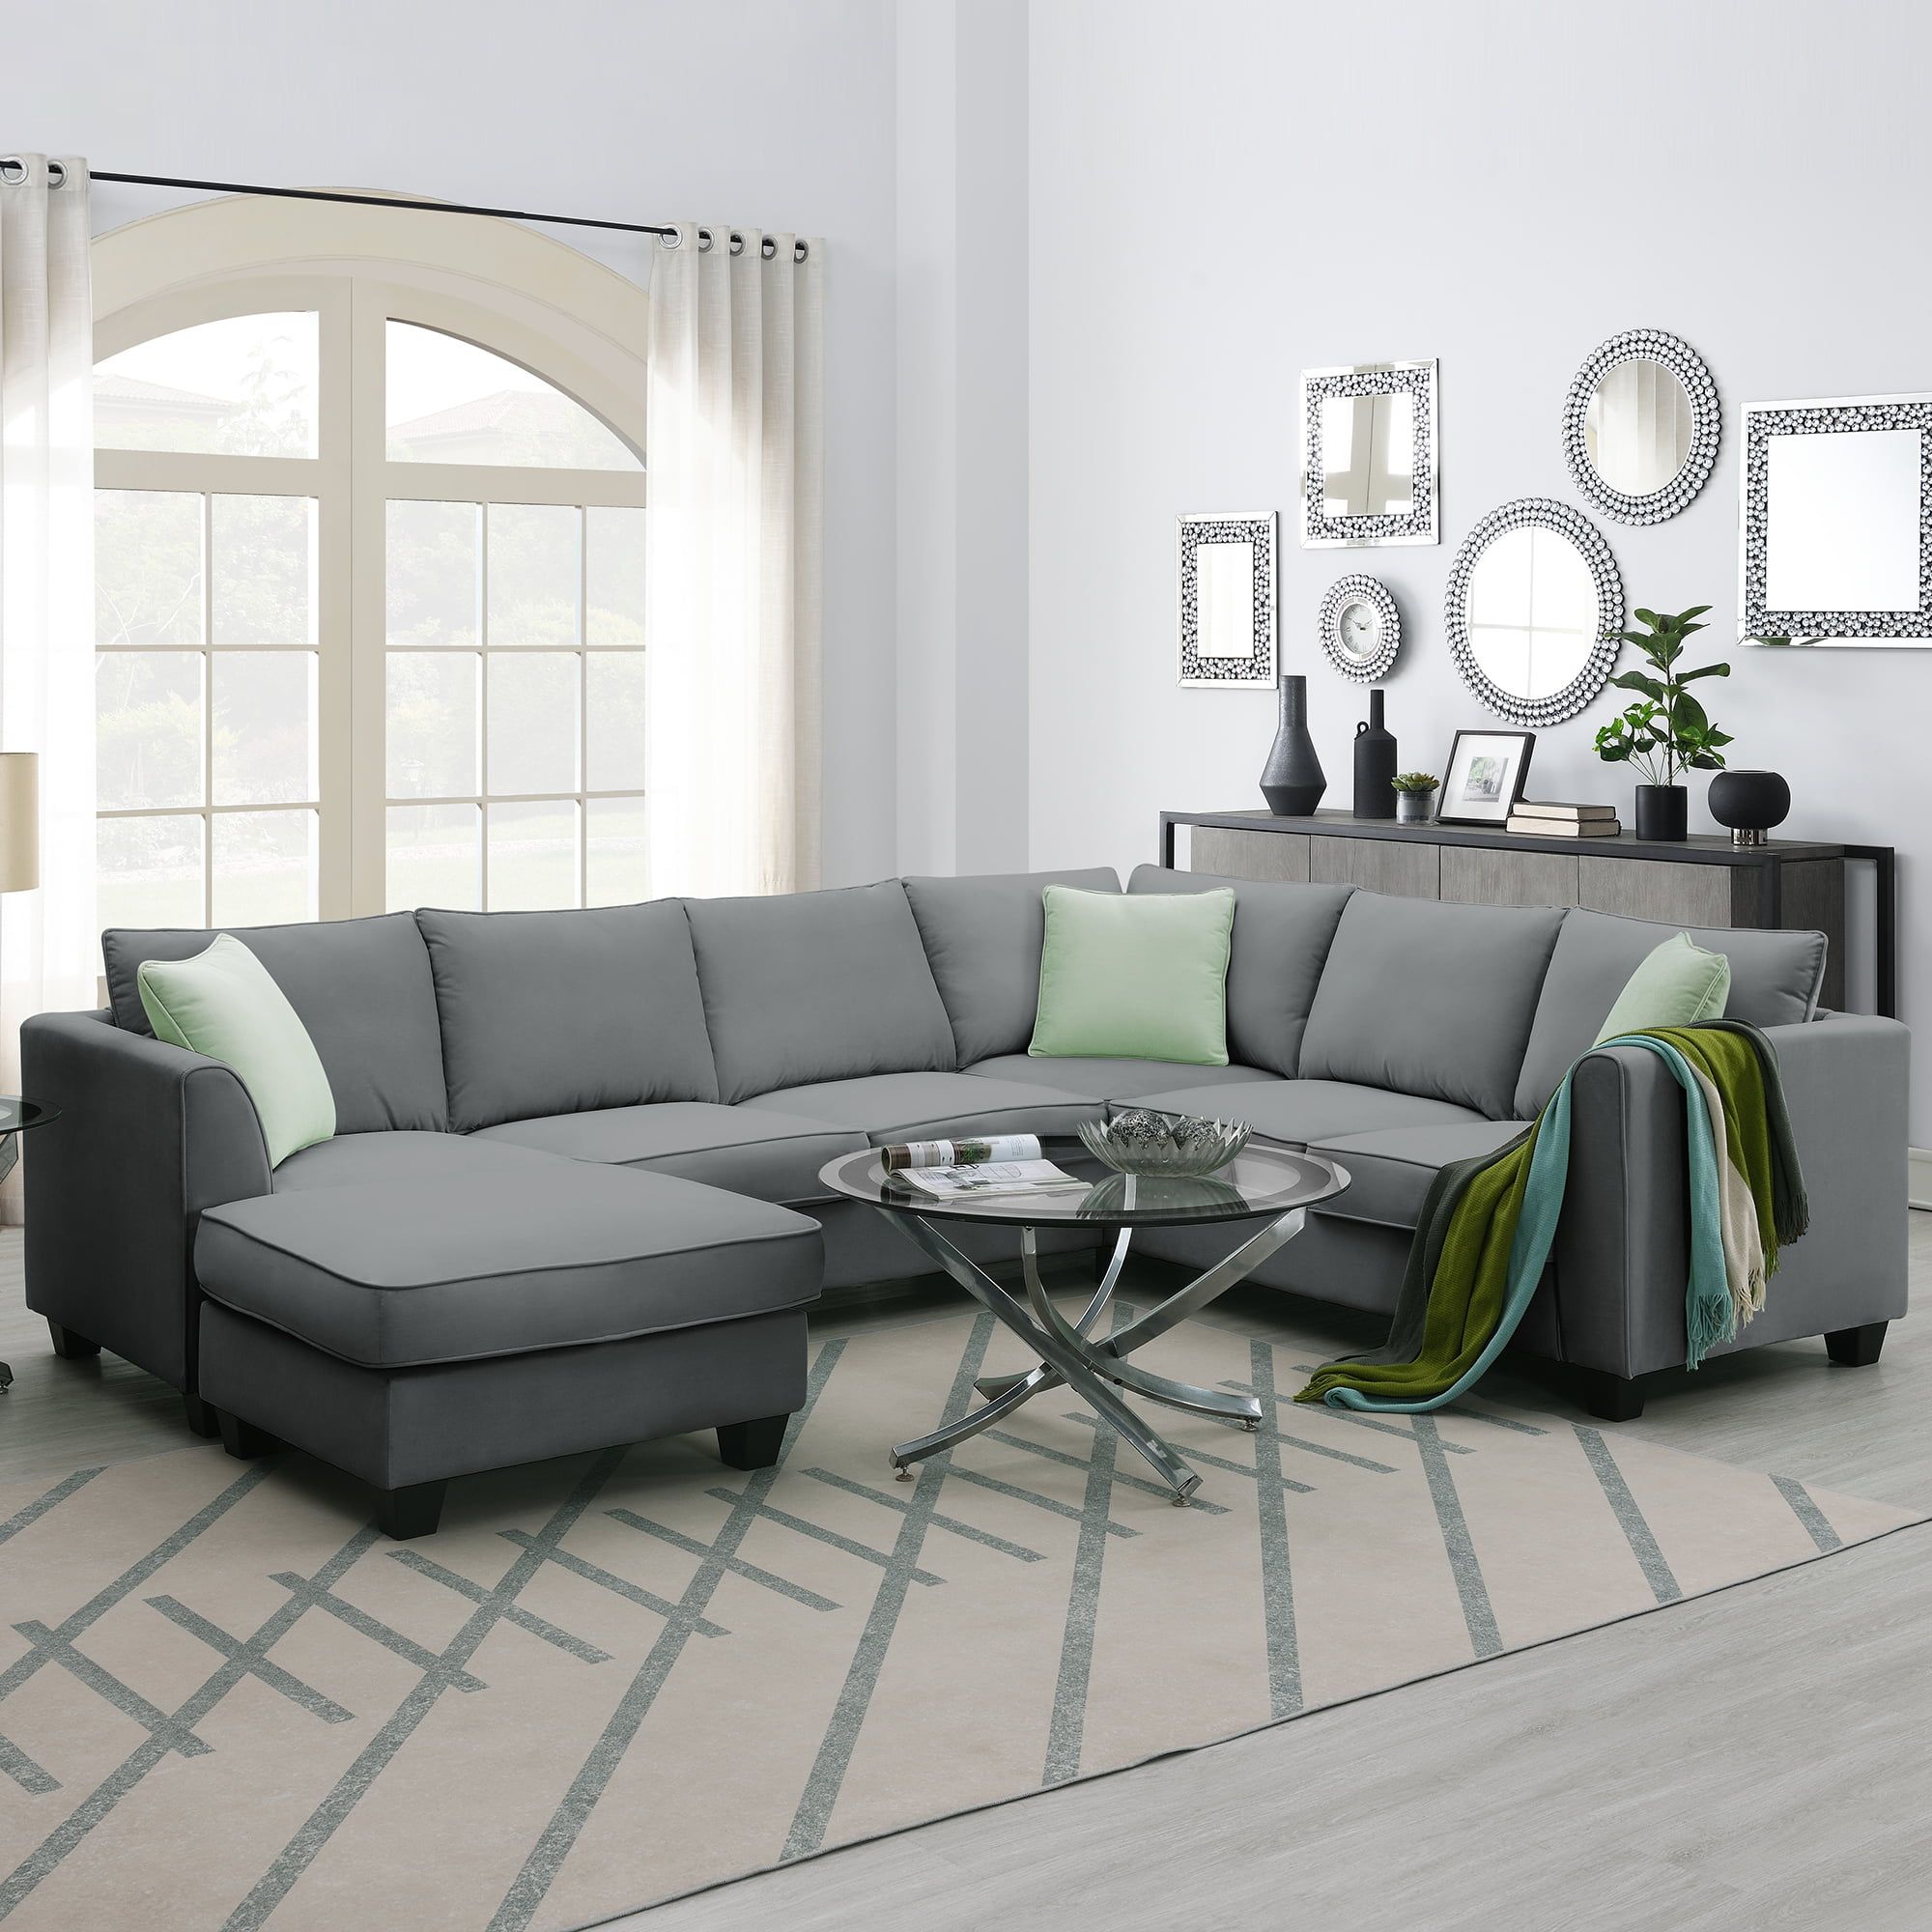 L Shaped Modular Sectional Couch, Kamida 7 Seater Sectional Couch With  Ottoman And 3 Pillows, Modern L Shaped Fabric Upholstered Couch Furniture, Heavy  Duty Sectional Couch For Living Room, Gray – Walmart With Regard To Heavy Duty Sectional Couches (View 2 of 15)